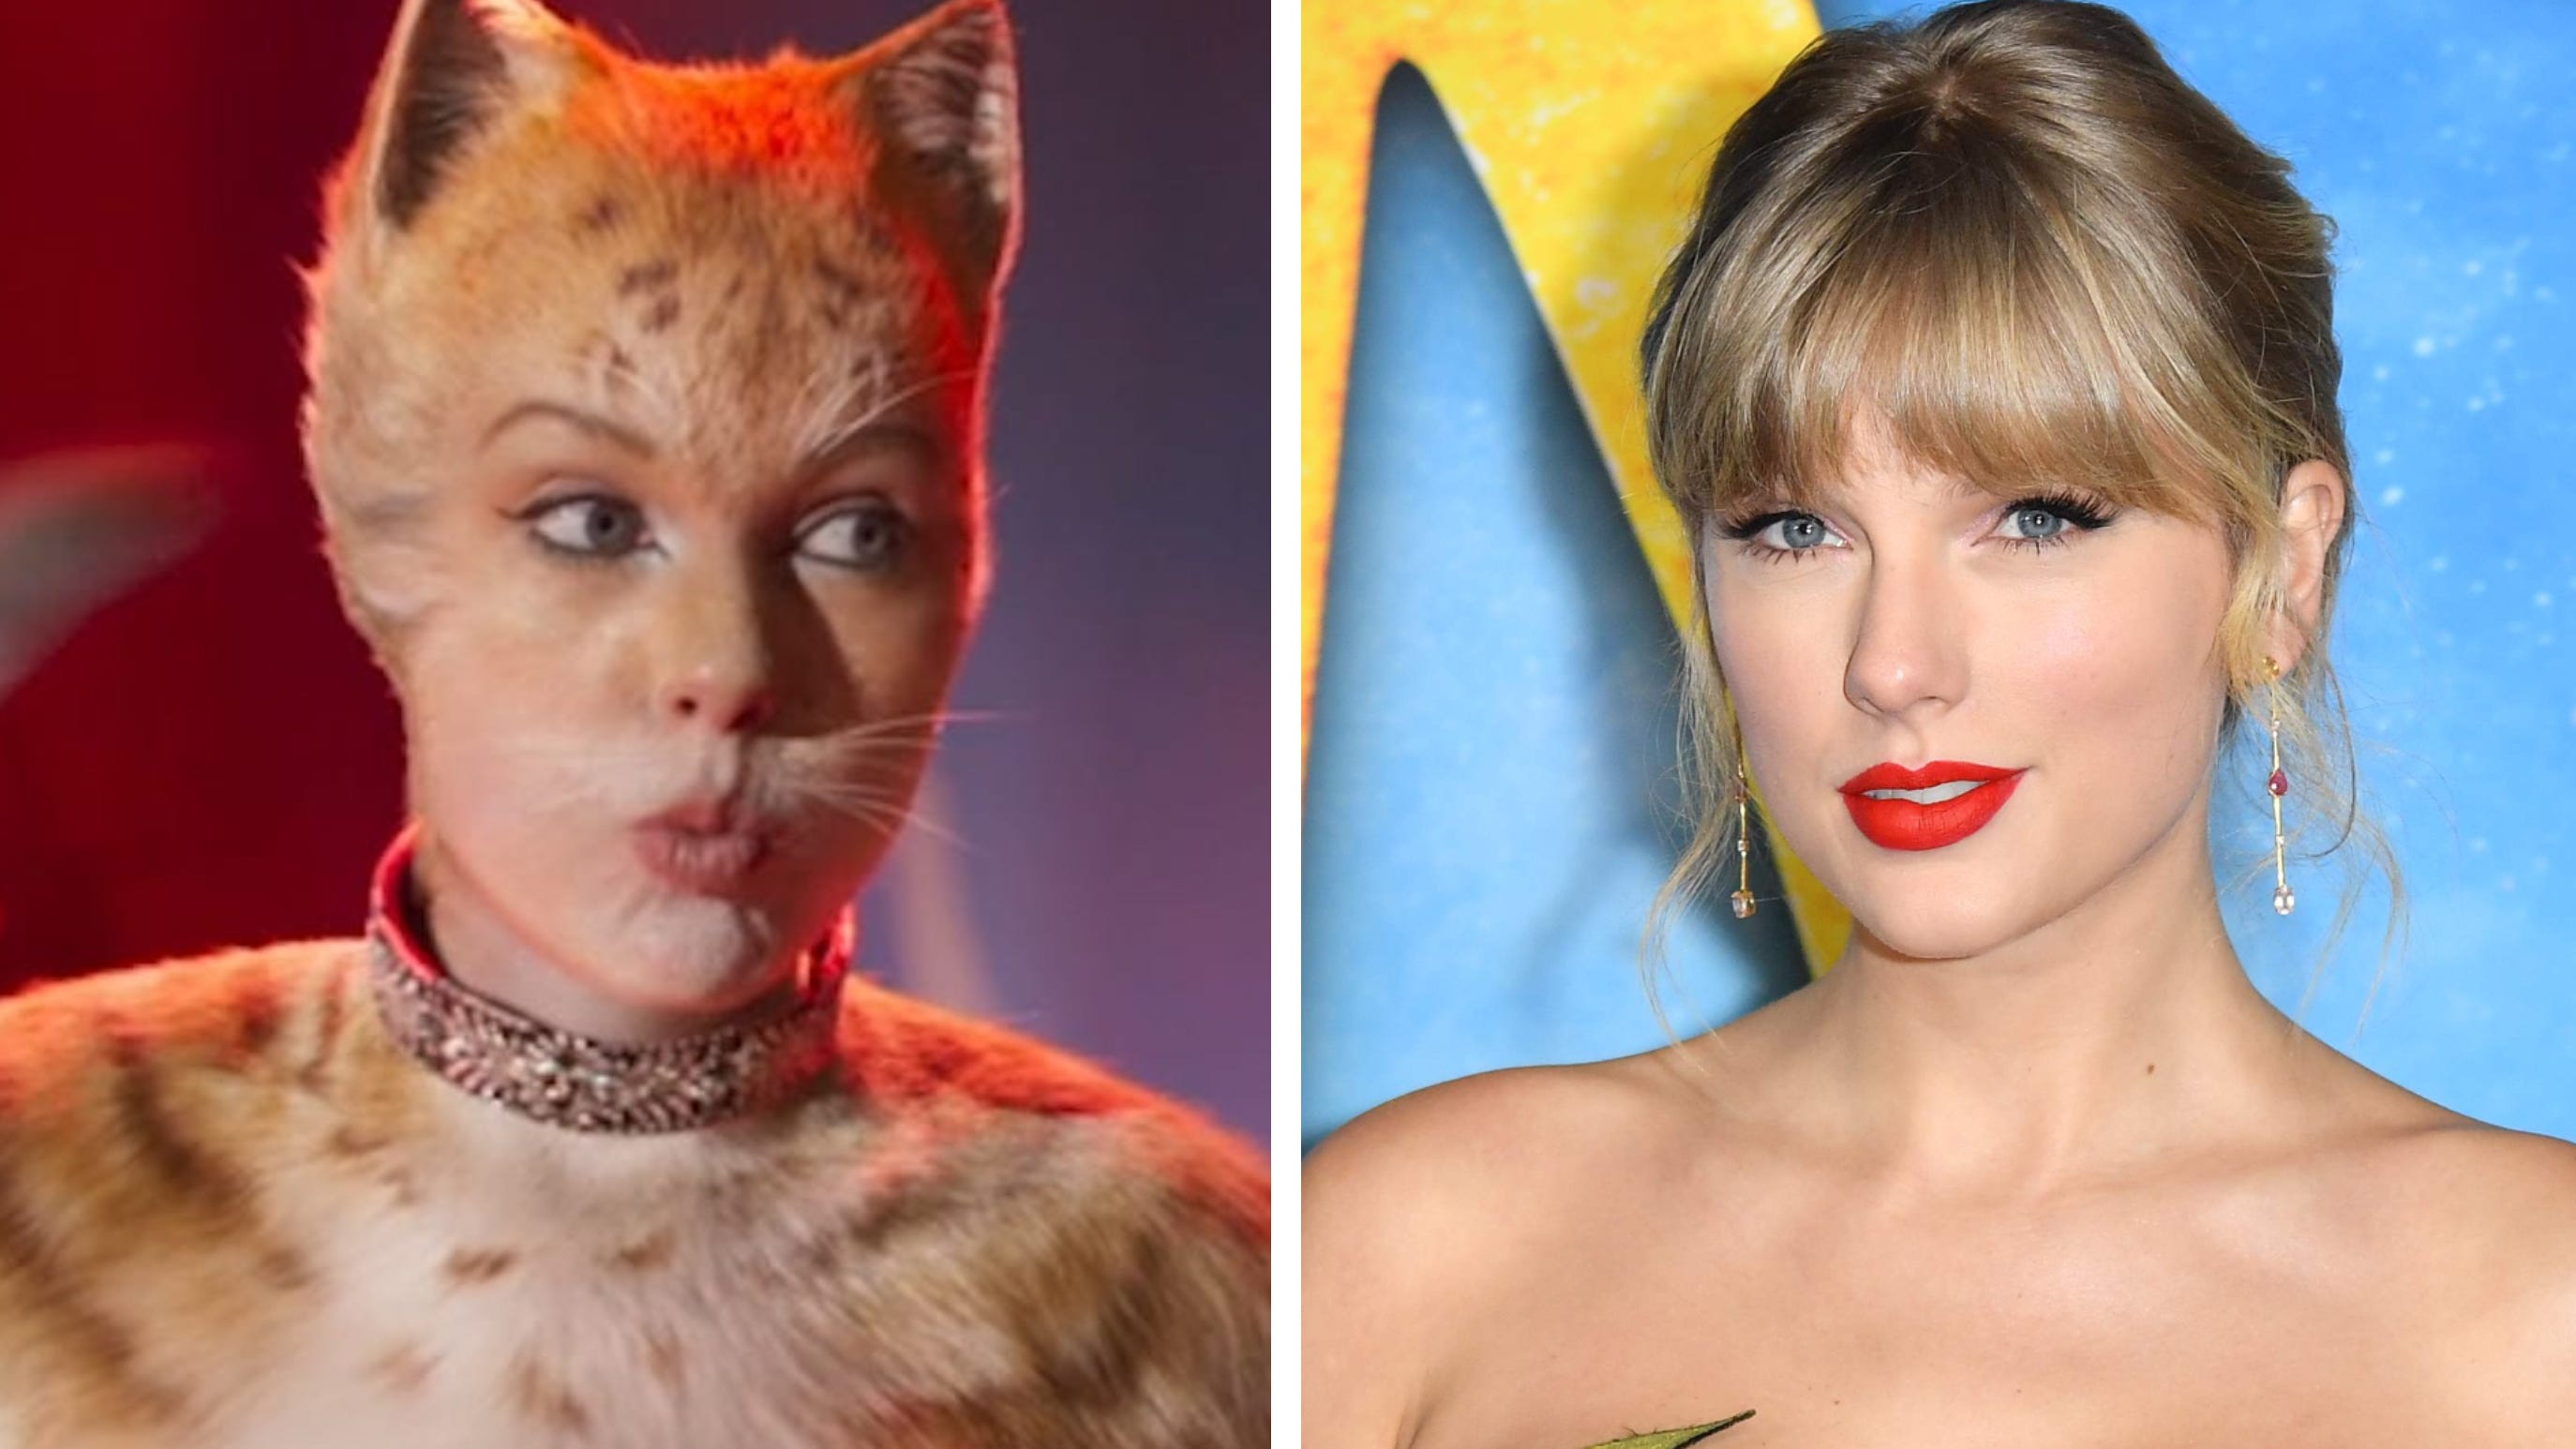 Cats': Taylor Swift has one line in the movie, but crushes her song